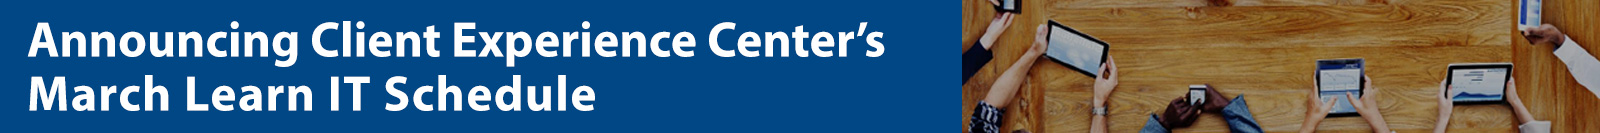 Announcing Client Experience Center's March Learn IT Schedule